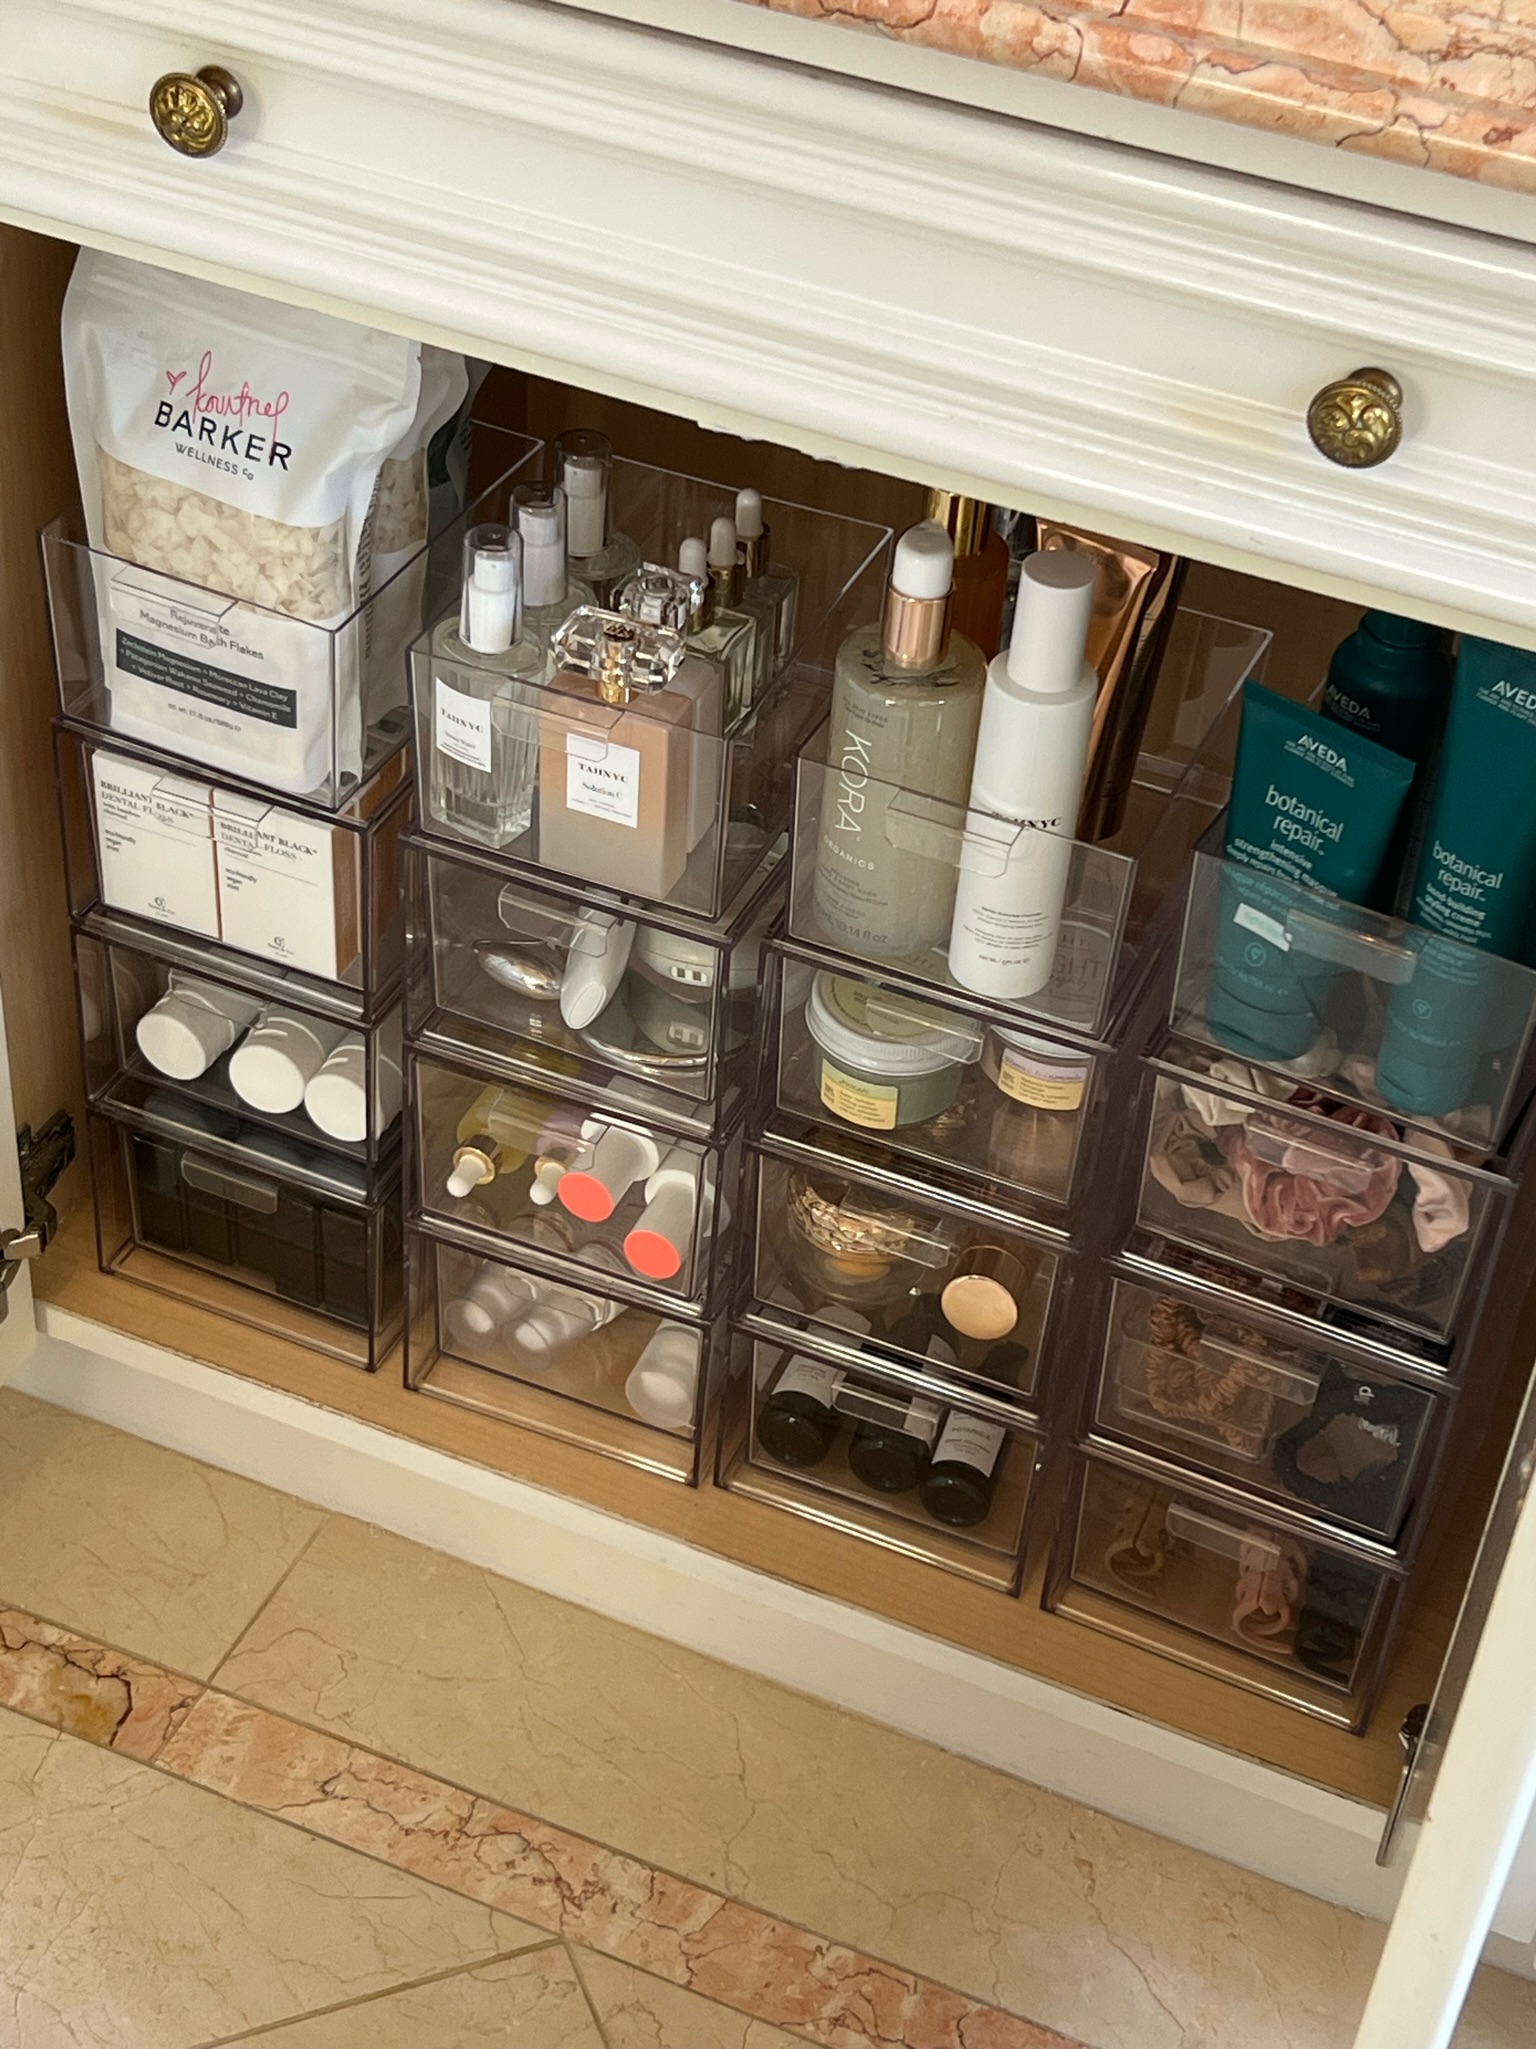 4. Use clear drawers and bins